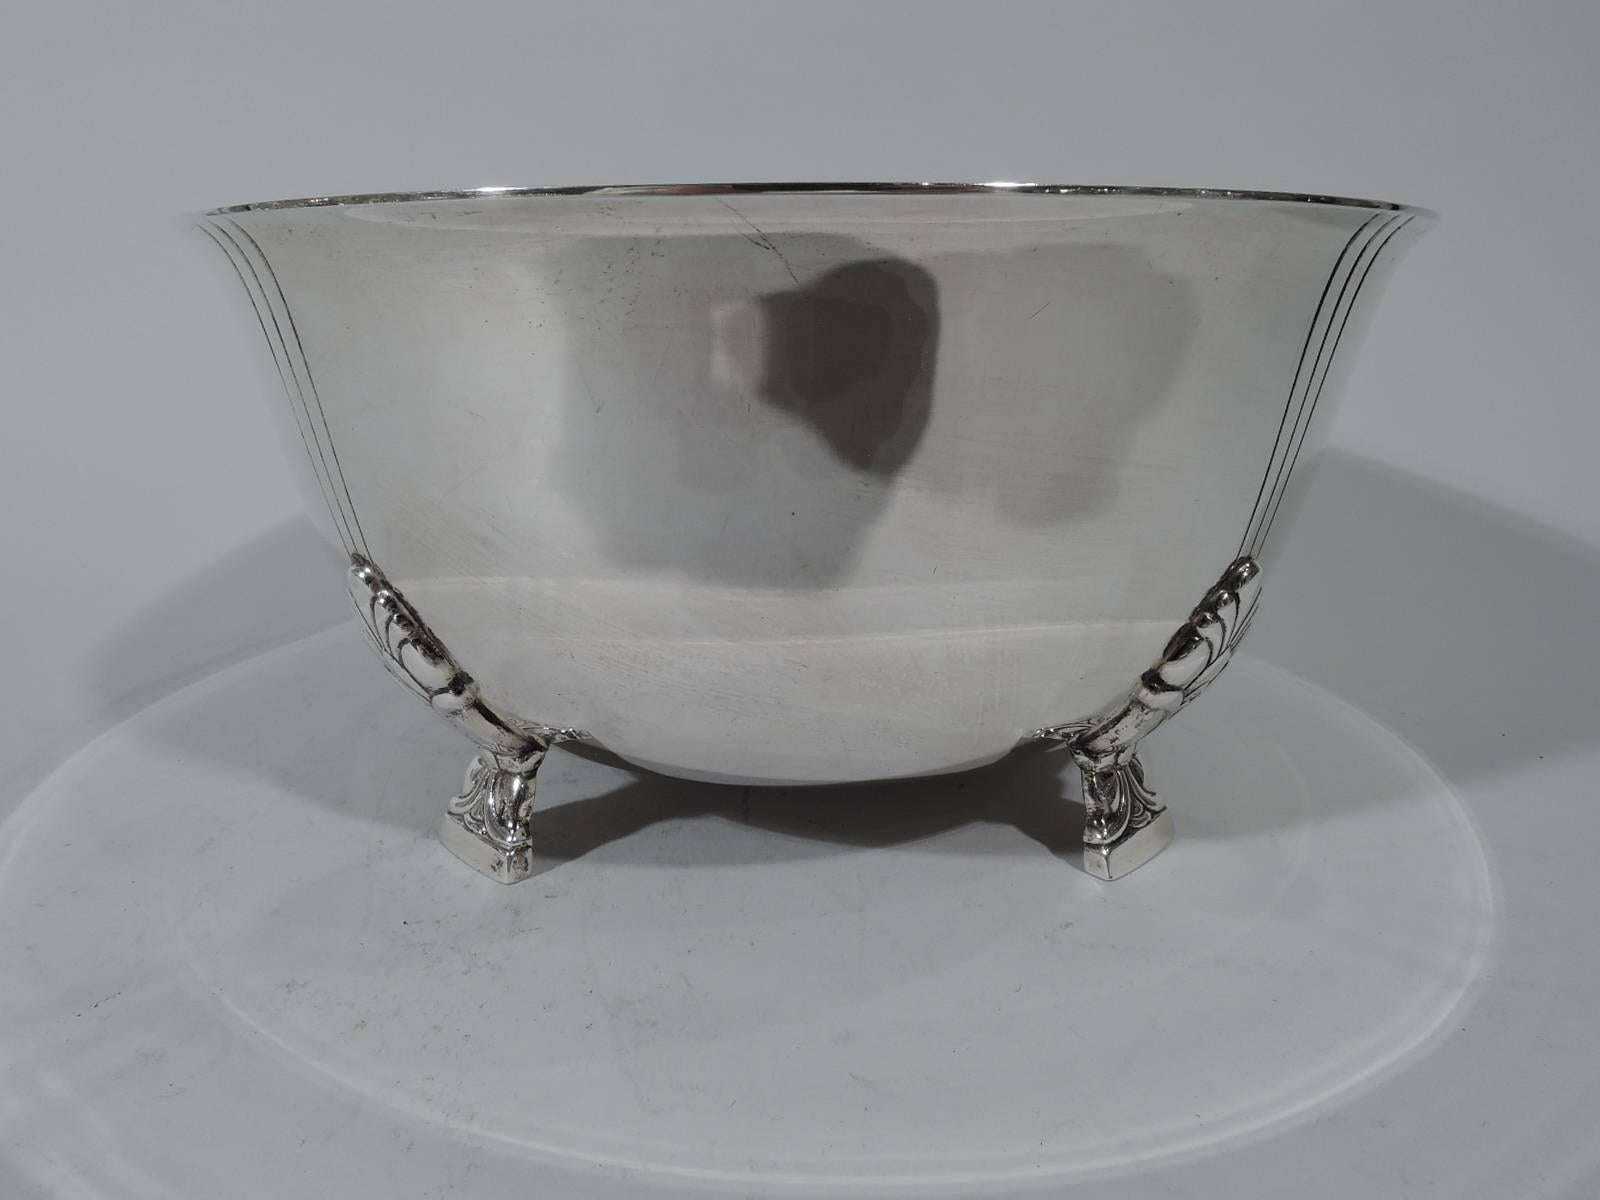 Classic sterling silver bowl in Palmette pattern. Made by Tiffany & Co. in New York. Curved sides and flared rim. Rests on four side-mounted stylized floral supports. Each support radiates three incised and vertical lines. An early piece in this